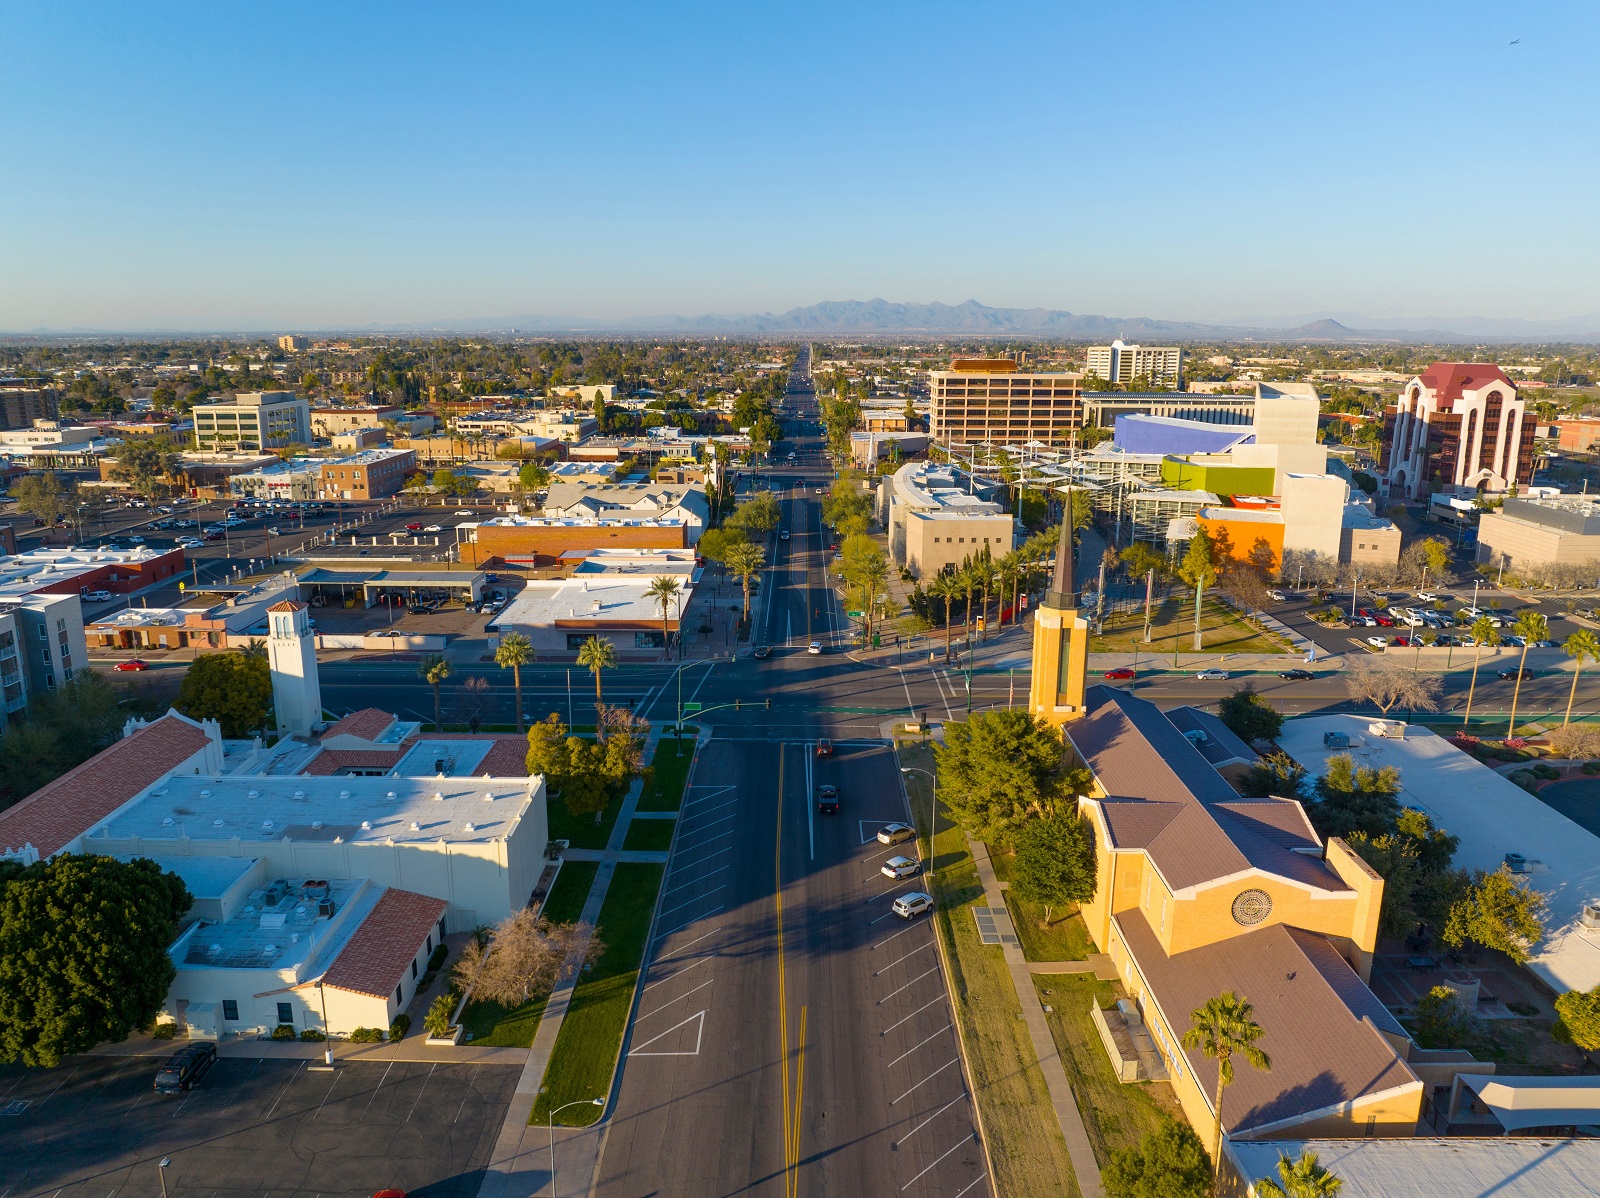 <p class="wp-caption-text">Image Credit: Shutterstock / Wangkun Jia</p>  <p><span>Mesa’s wide streets and low-density layout make driving the most practical choice for residents, with minimal traffic issues even during peak hours.</span></p>